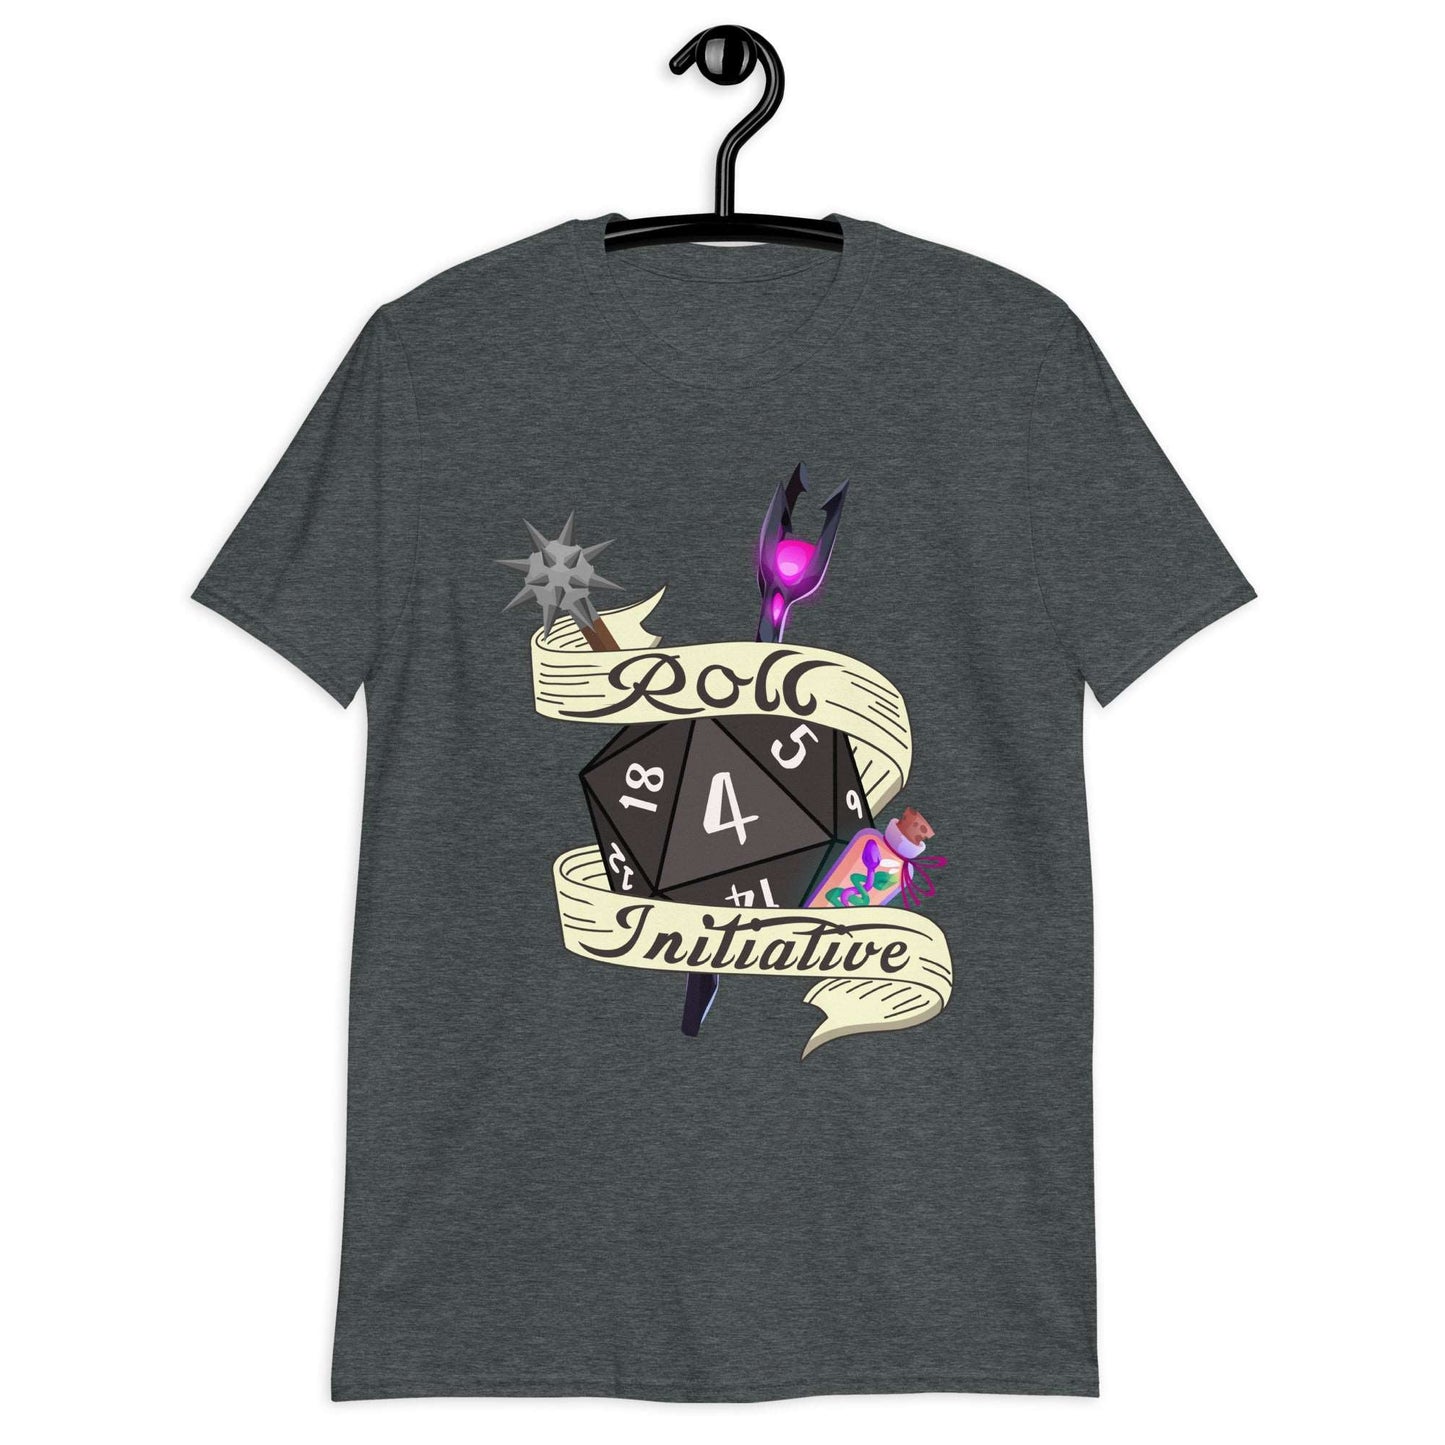 Roll for Initiative, D20 RPG T Shirt. Ideal as gift for role play gamers